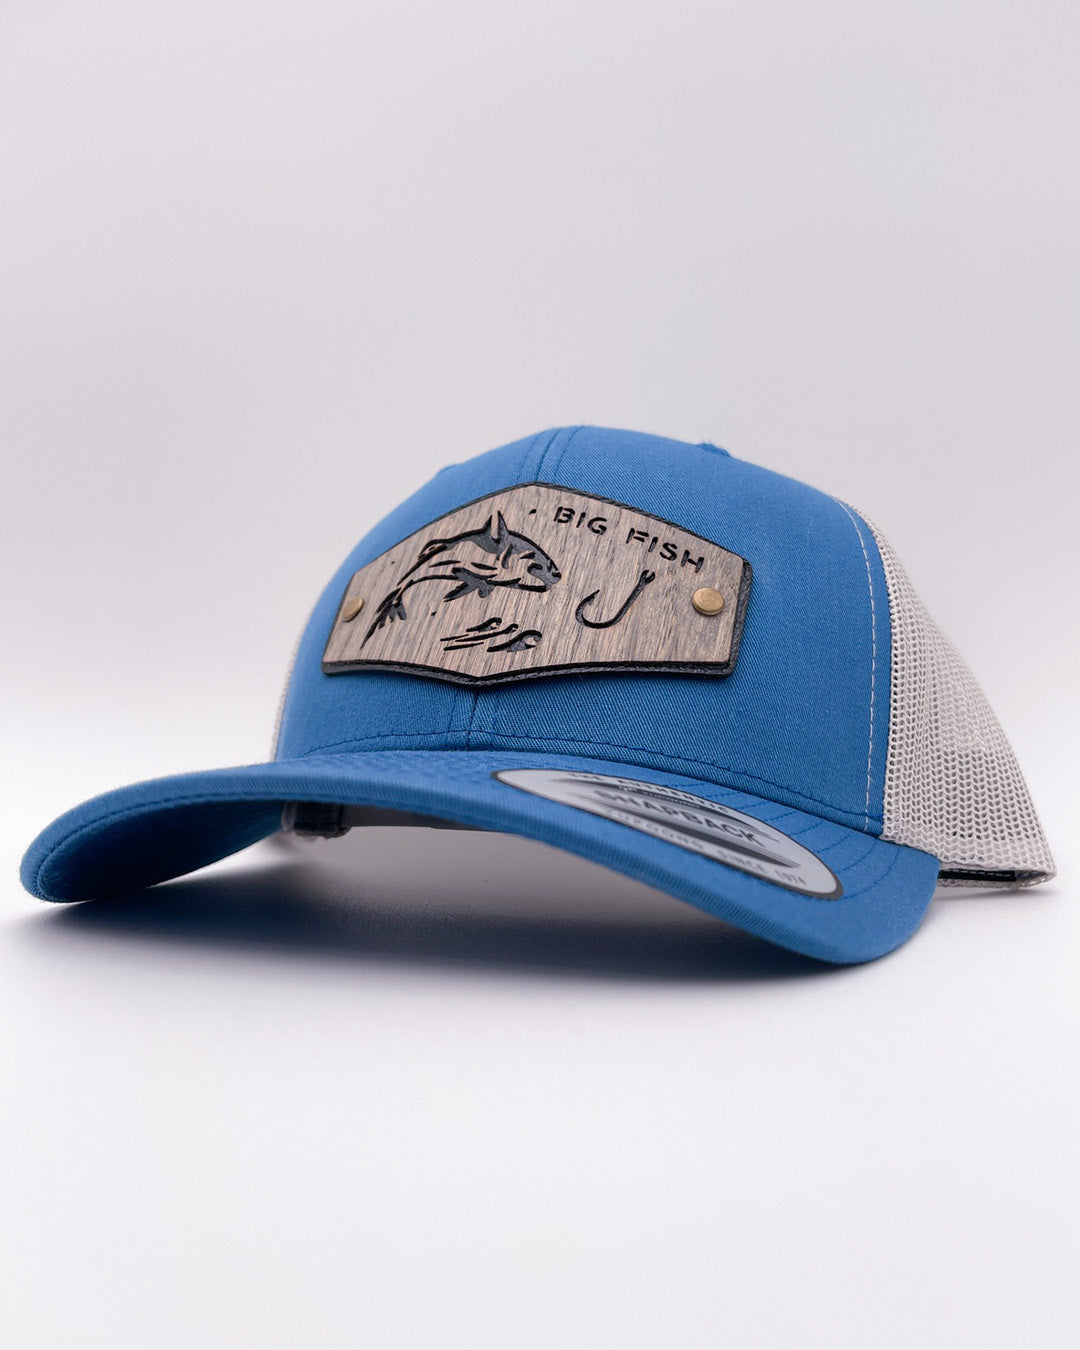 Affordable Cheap Custom Leather Patches Hats Big Fish Real Wood Patch Hat Retro Trucker Mesh Cap Cheap Custom Logo Caps